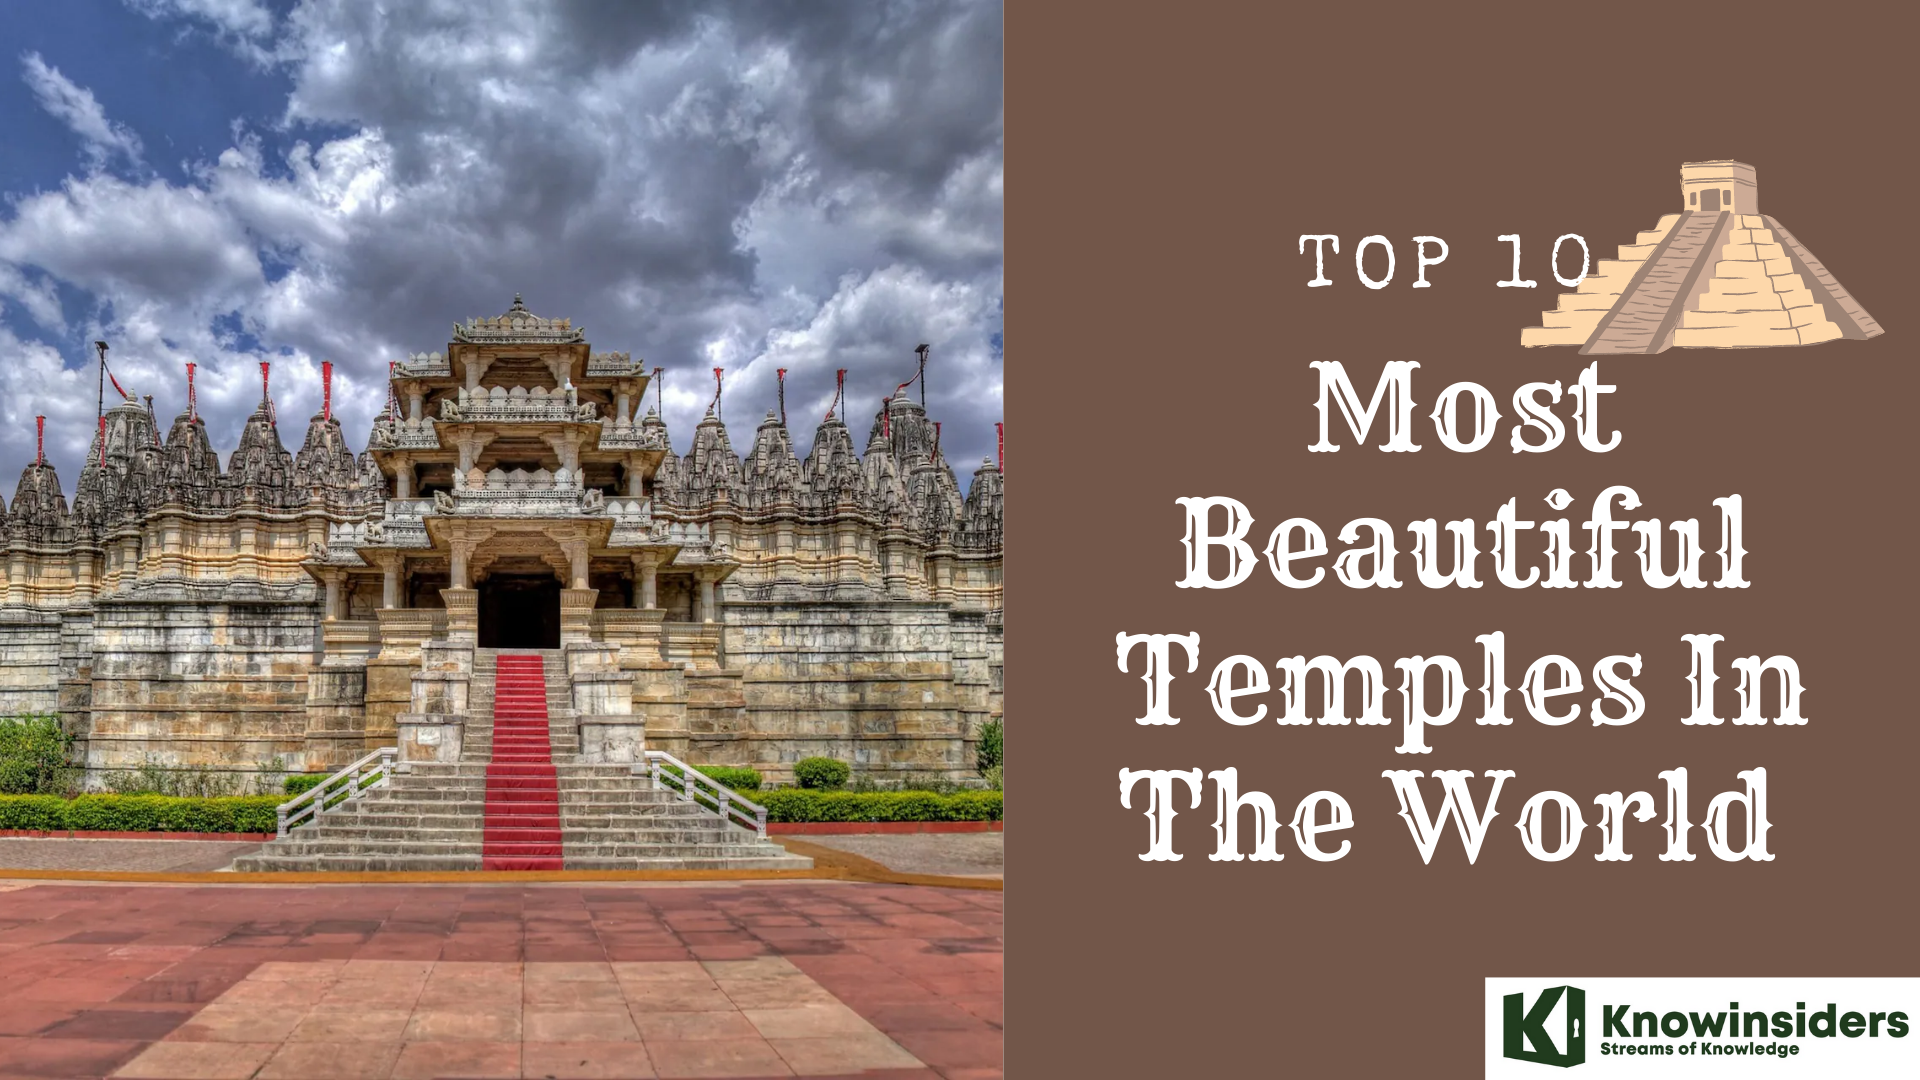 Top 10 Incredible Beautiful Temples in The World | KnowInsiders